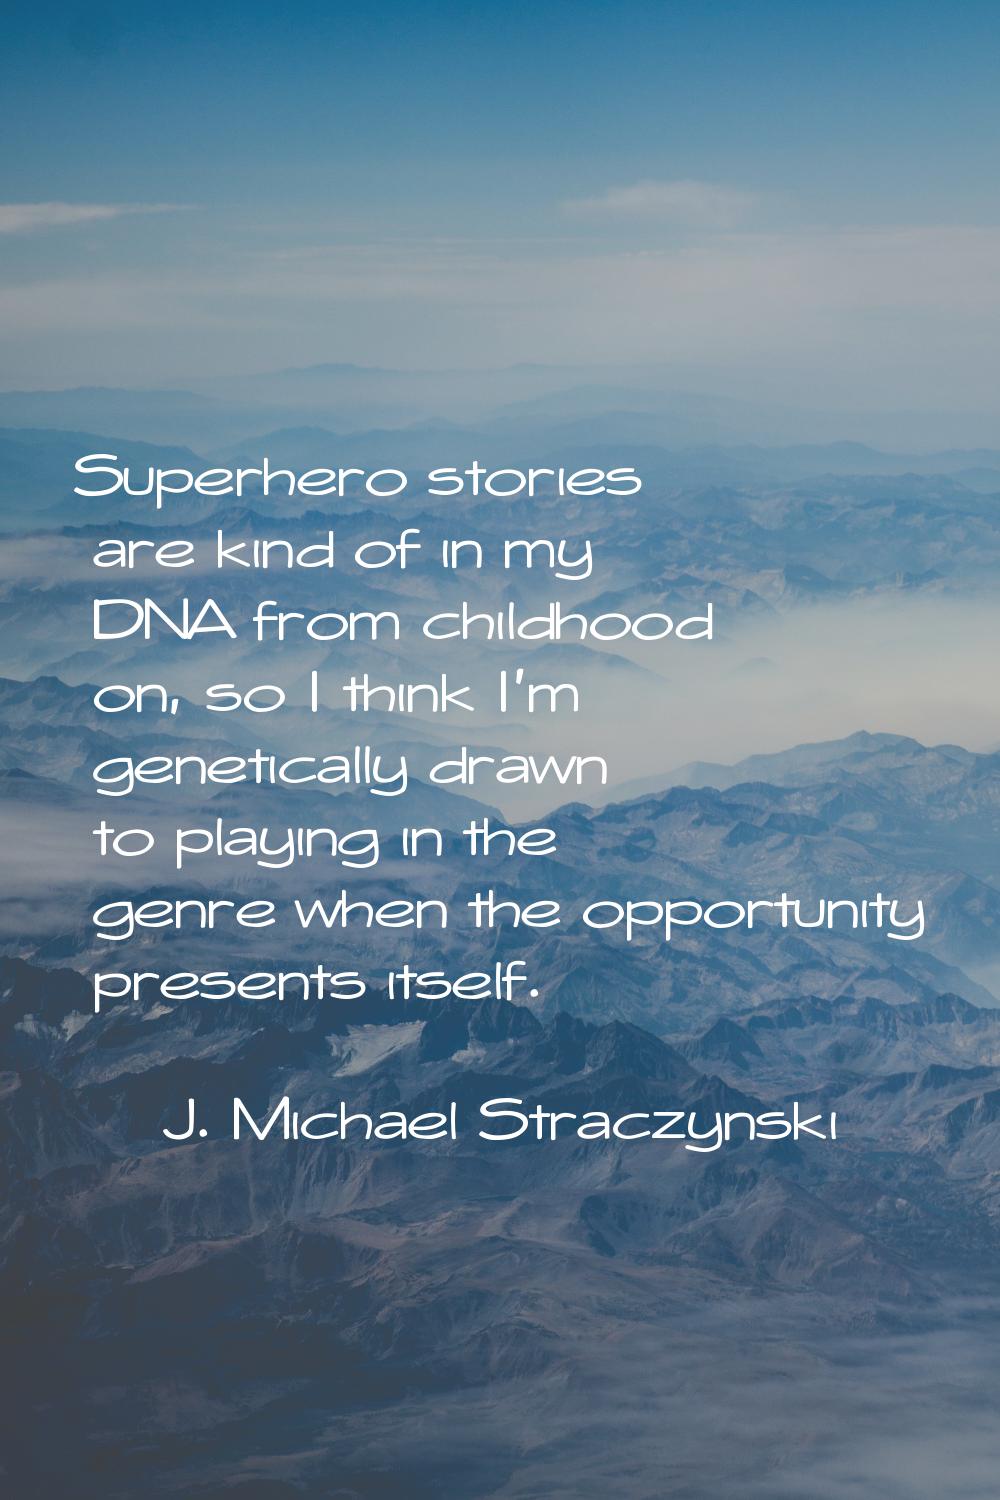 Superhero stories are kind of in my DNA from childhood on, so I think I'm genetically drawn to play